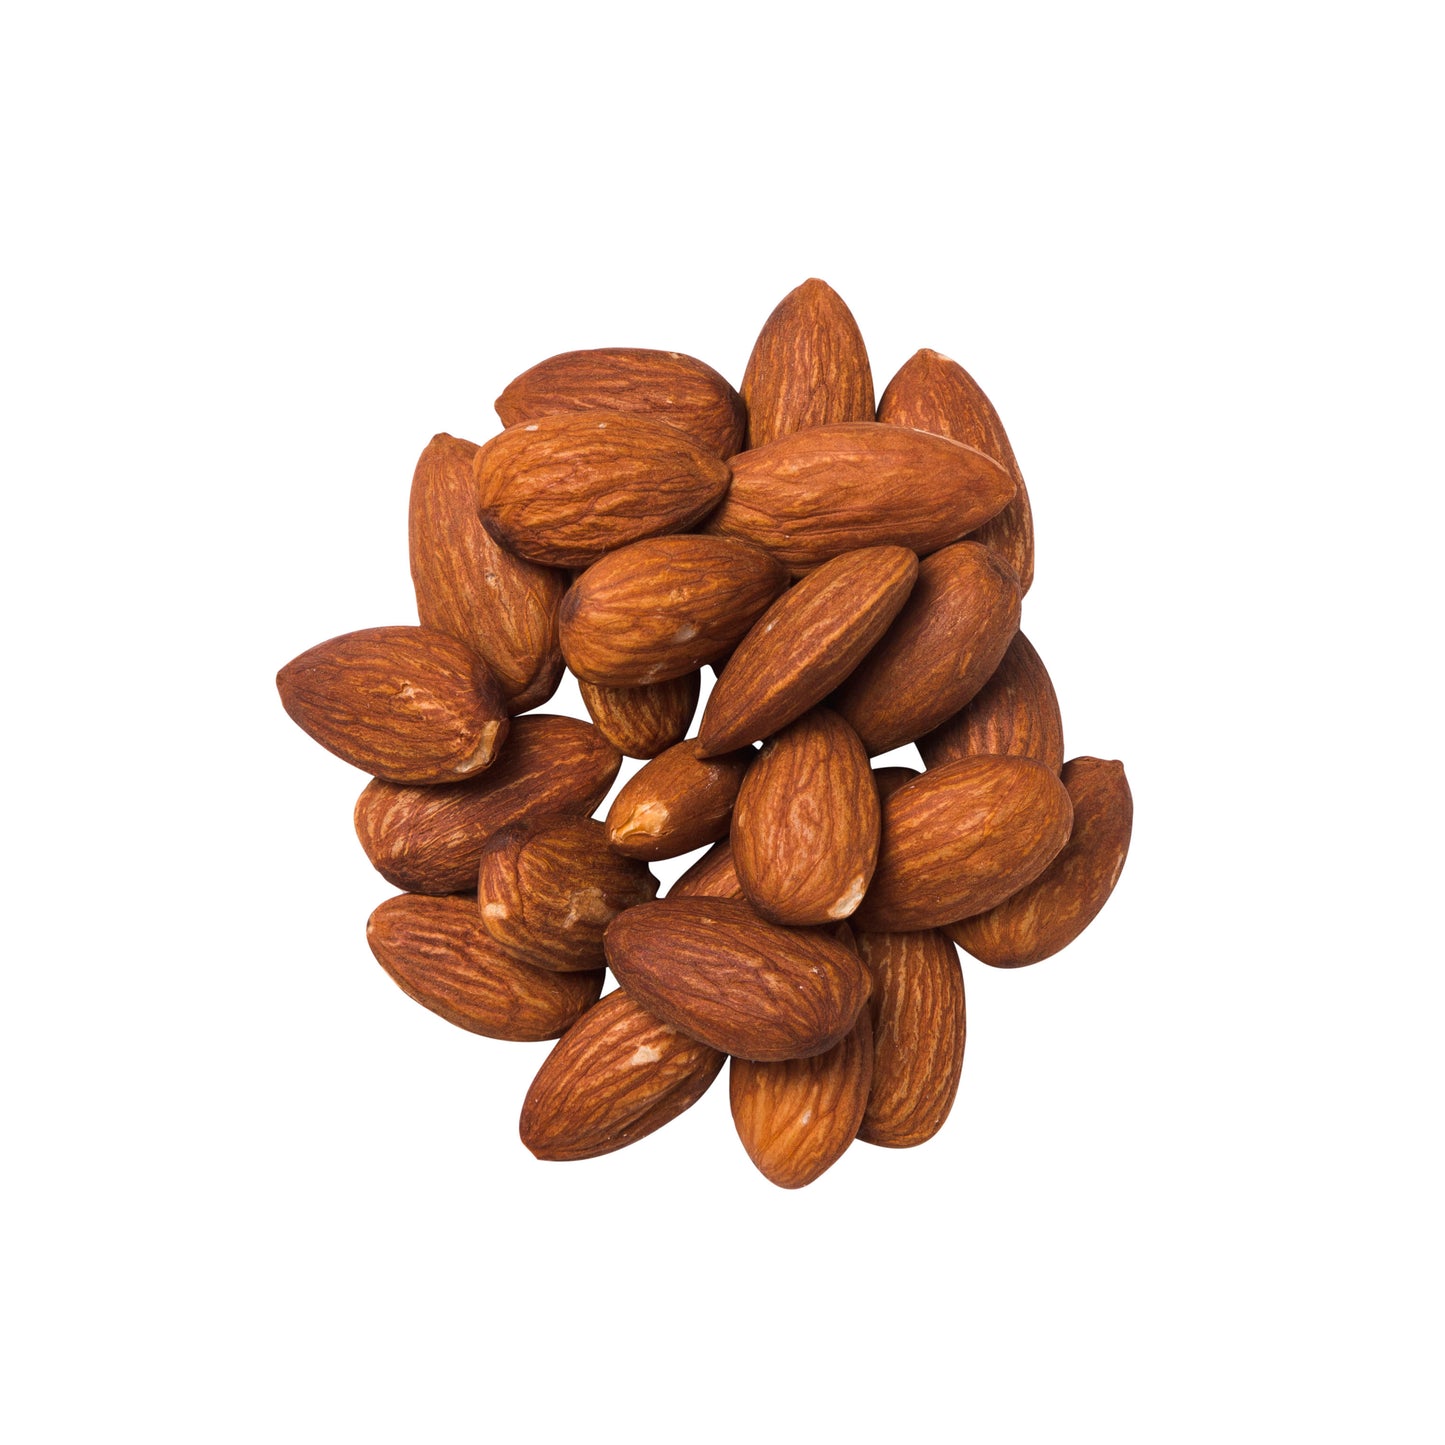 Almonds Whole Transitional Roasted - 3kg